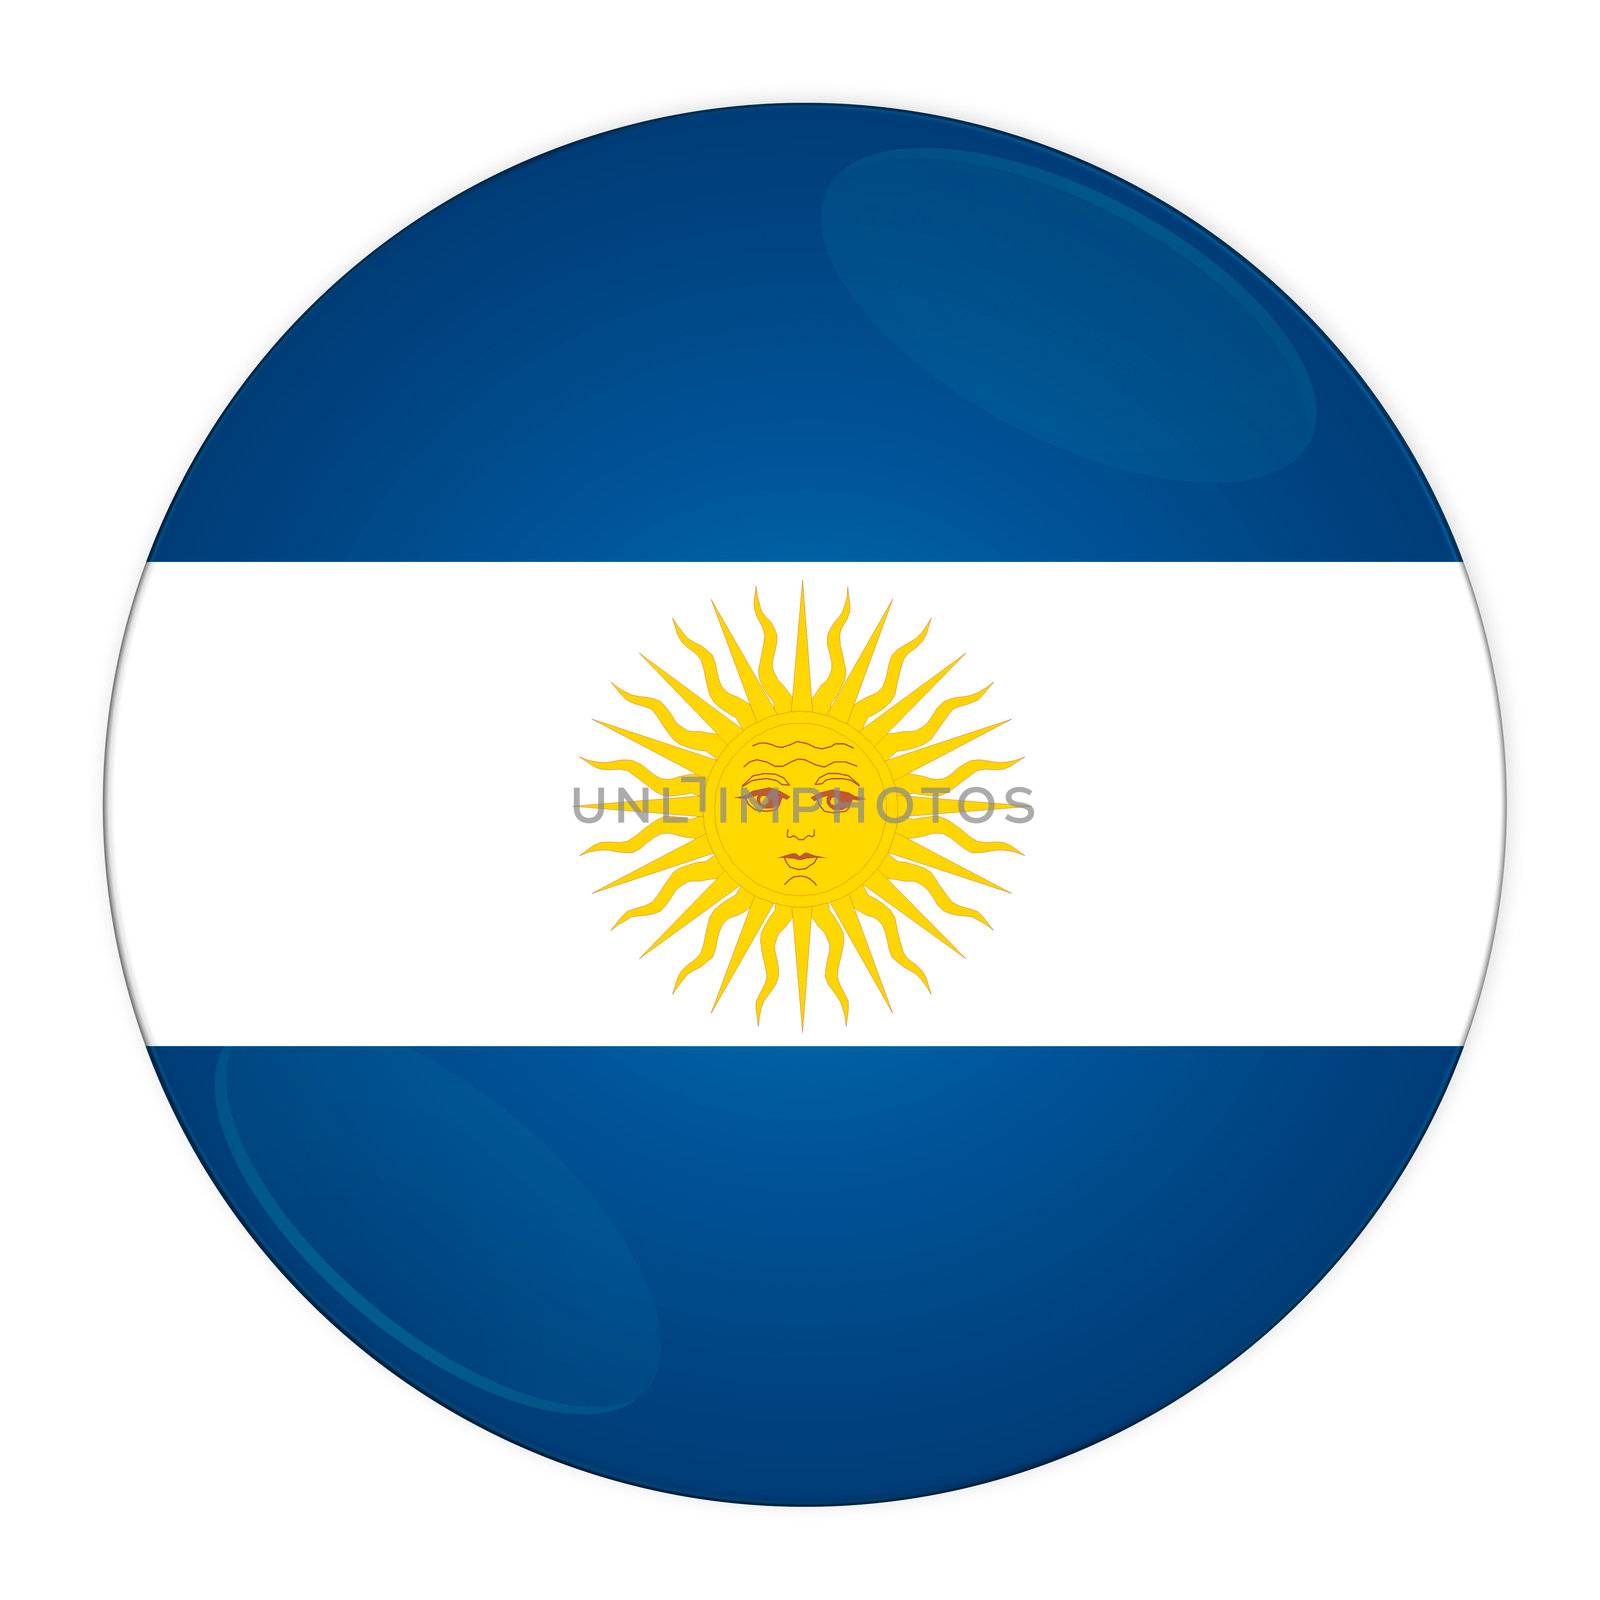 Abstract illustration: button with flag from Argentina country
